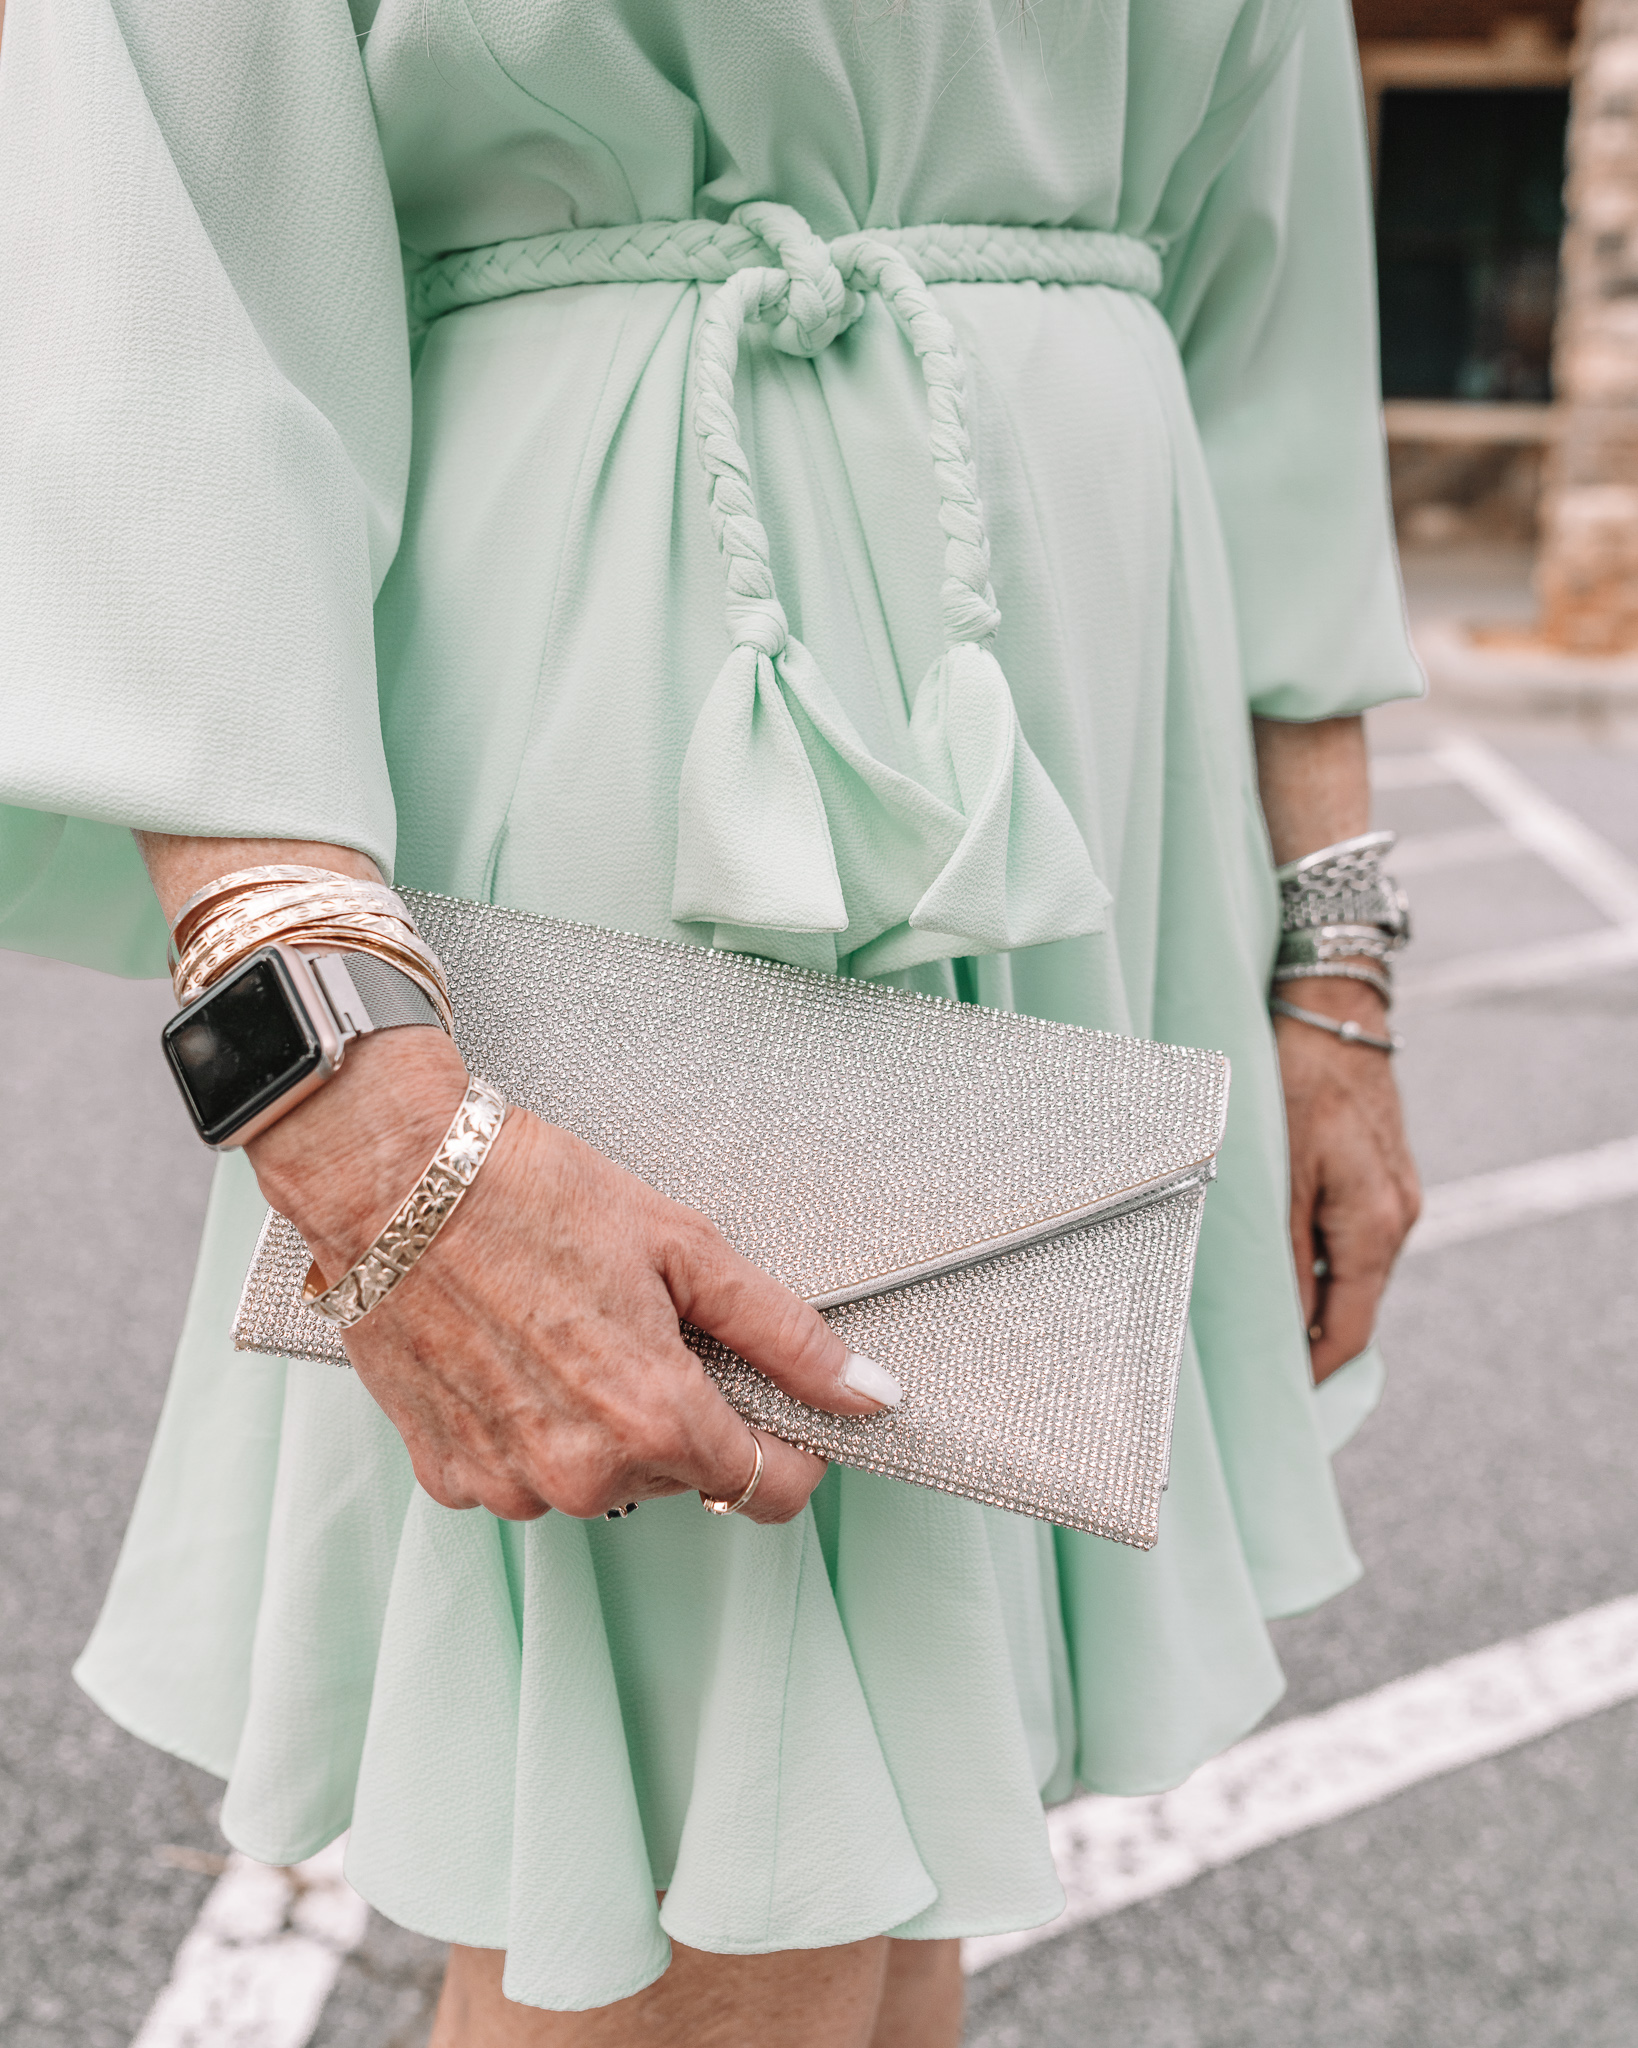 lisa in a mint green above the knee formal wedding guest dress and silver pumps